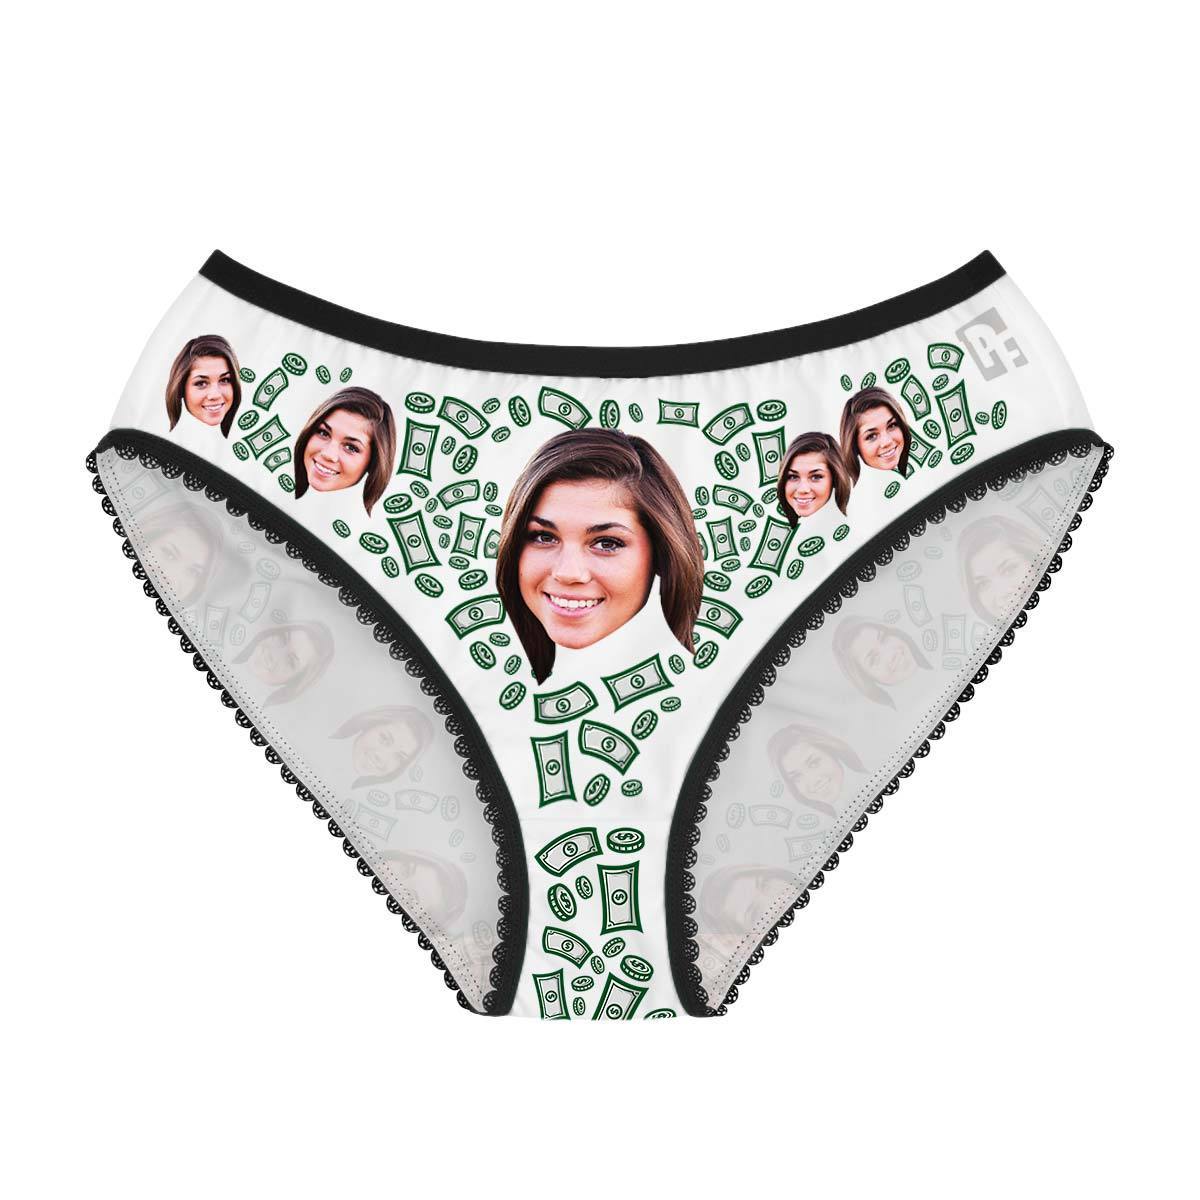 White Money women's underwear briefs personalized with photo printed on them